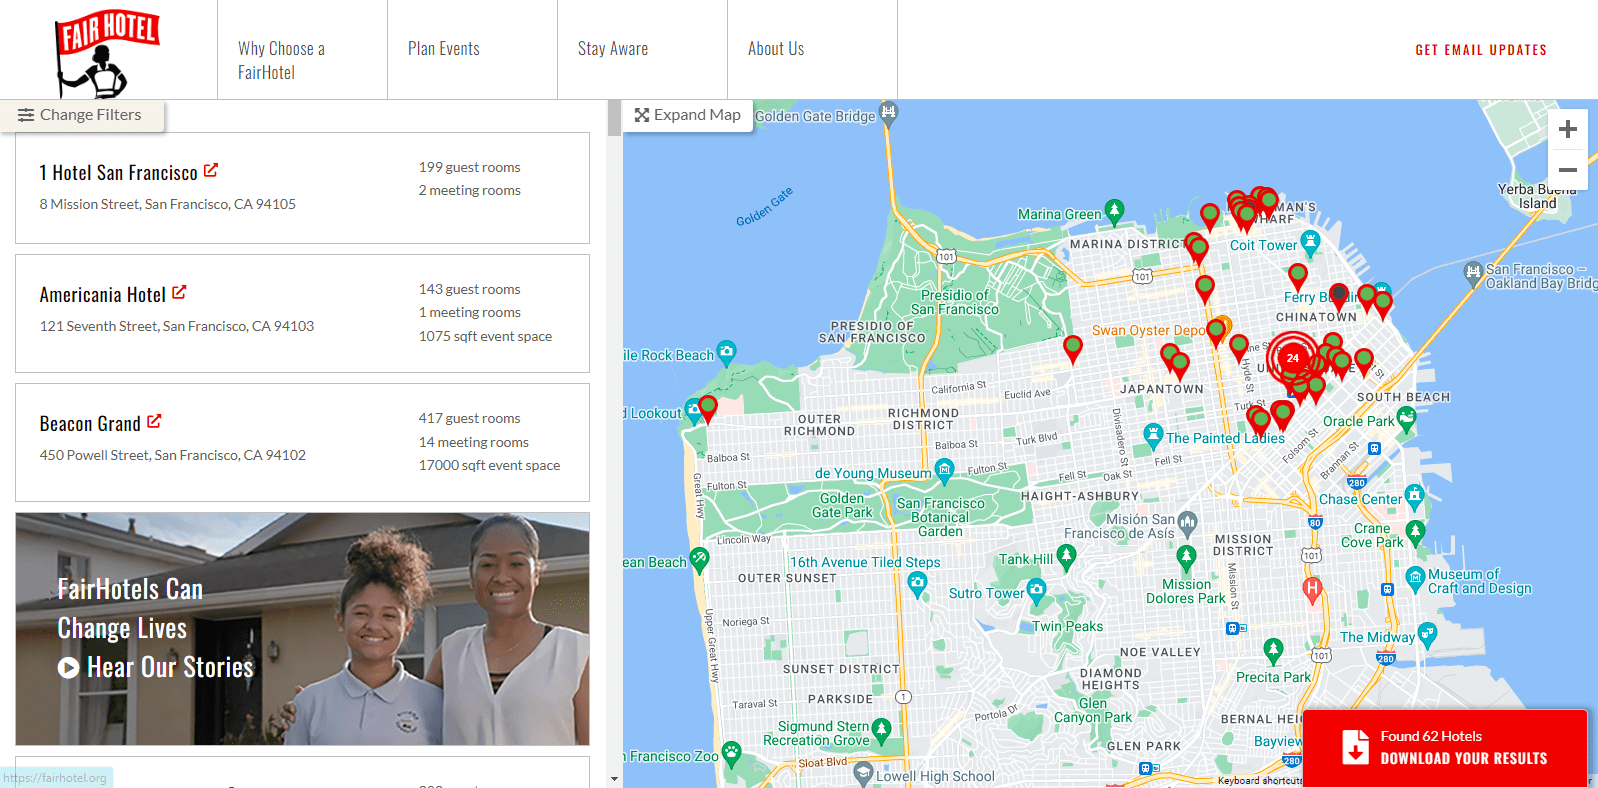 A screenshot of the Fair Hotel search function showing unionized hotels in San Francisco